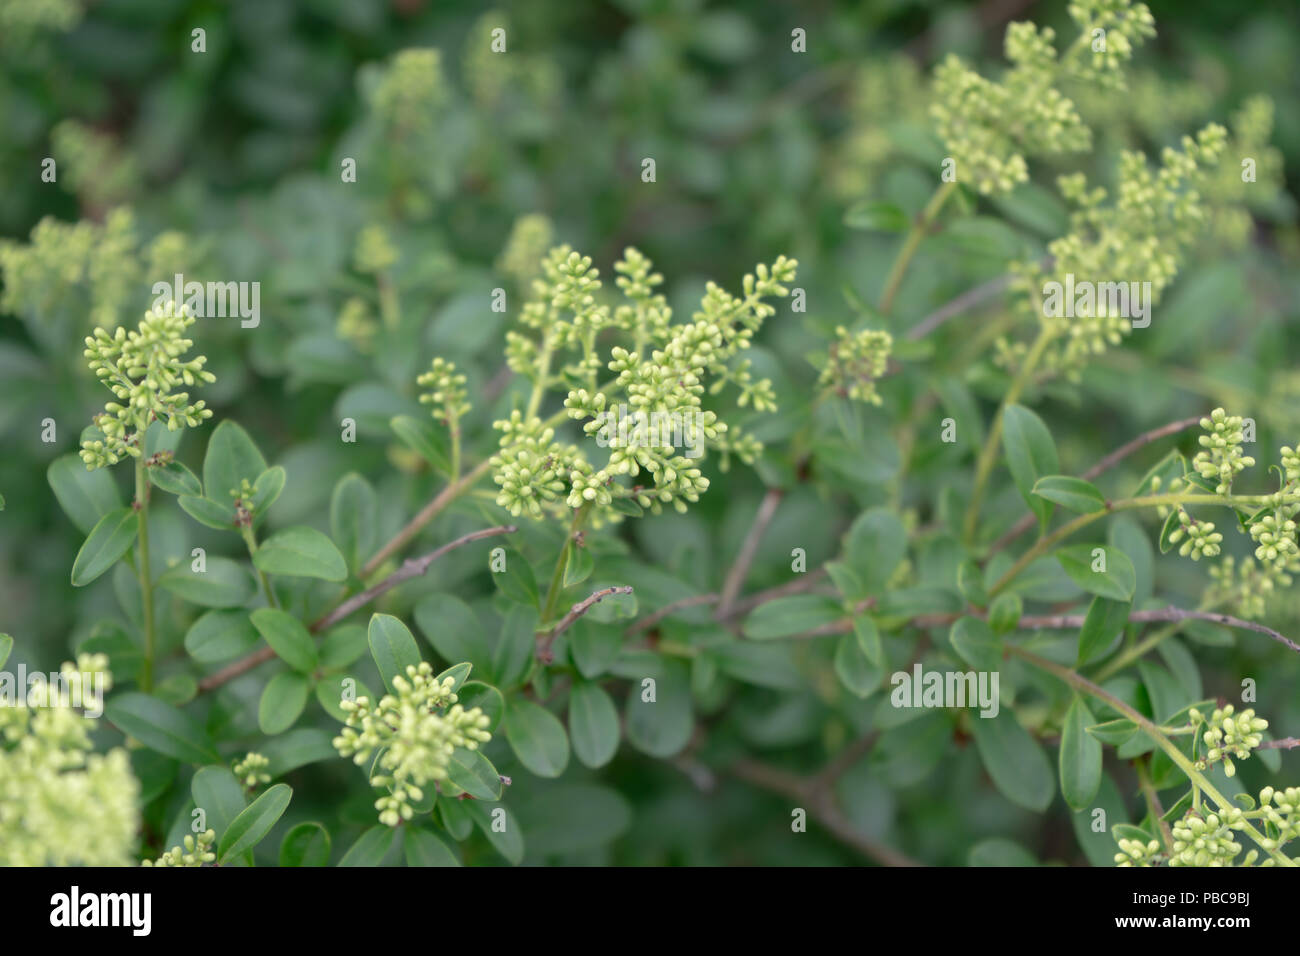 small plant with green leaves and blooming white flower bud Stock Photo